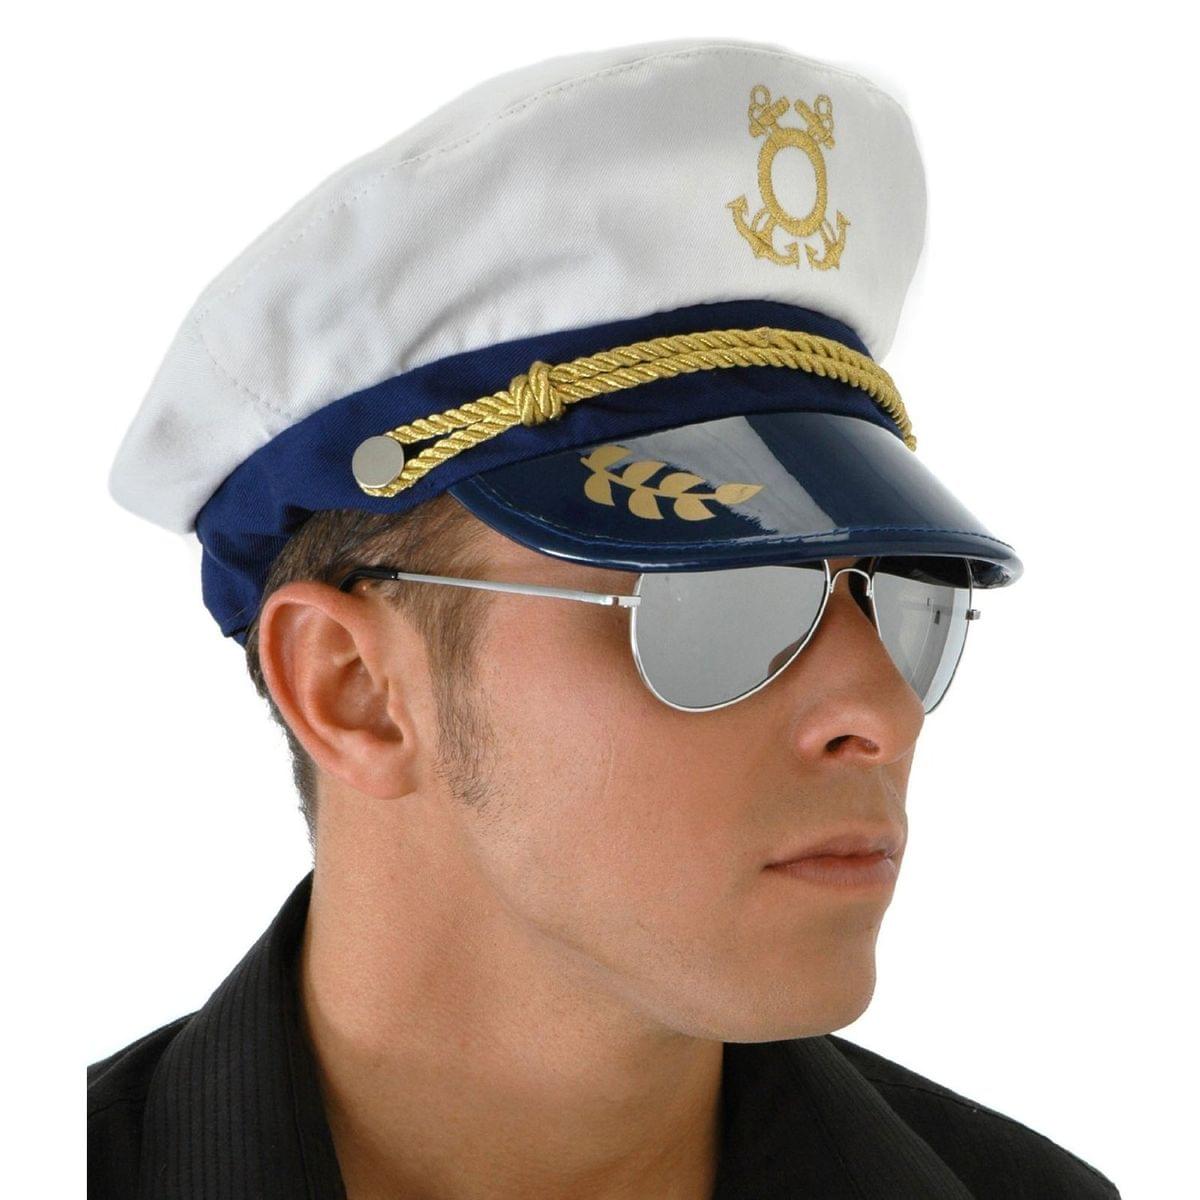 Yacht Captain Hat Adult Navy Costume Accessory One Size